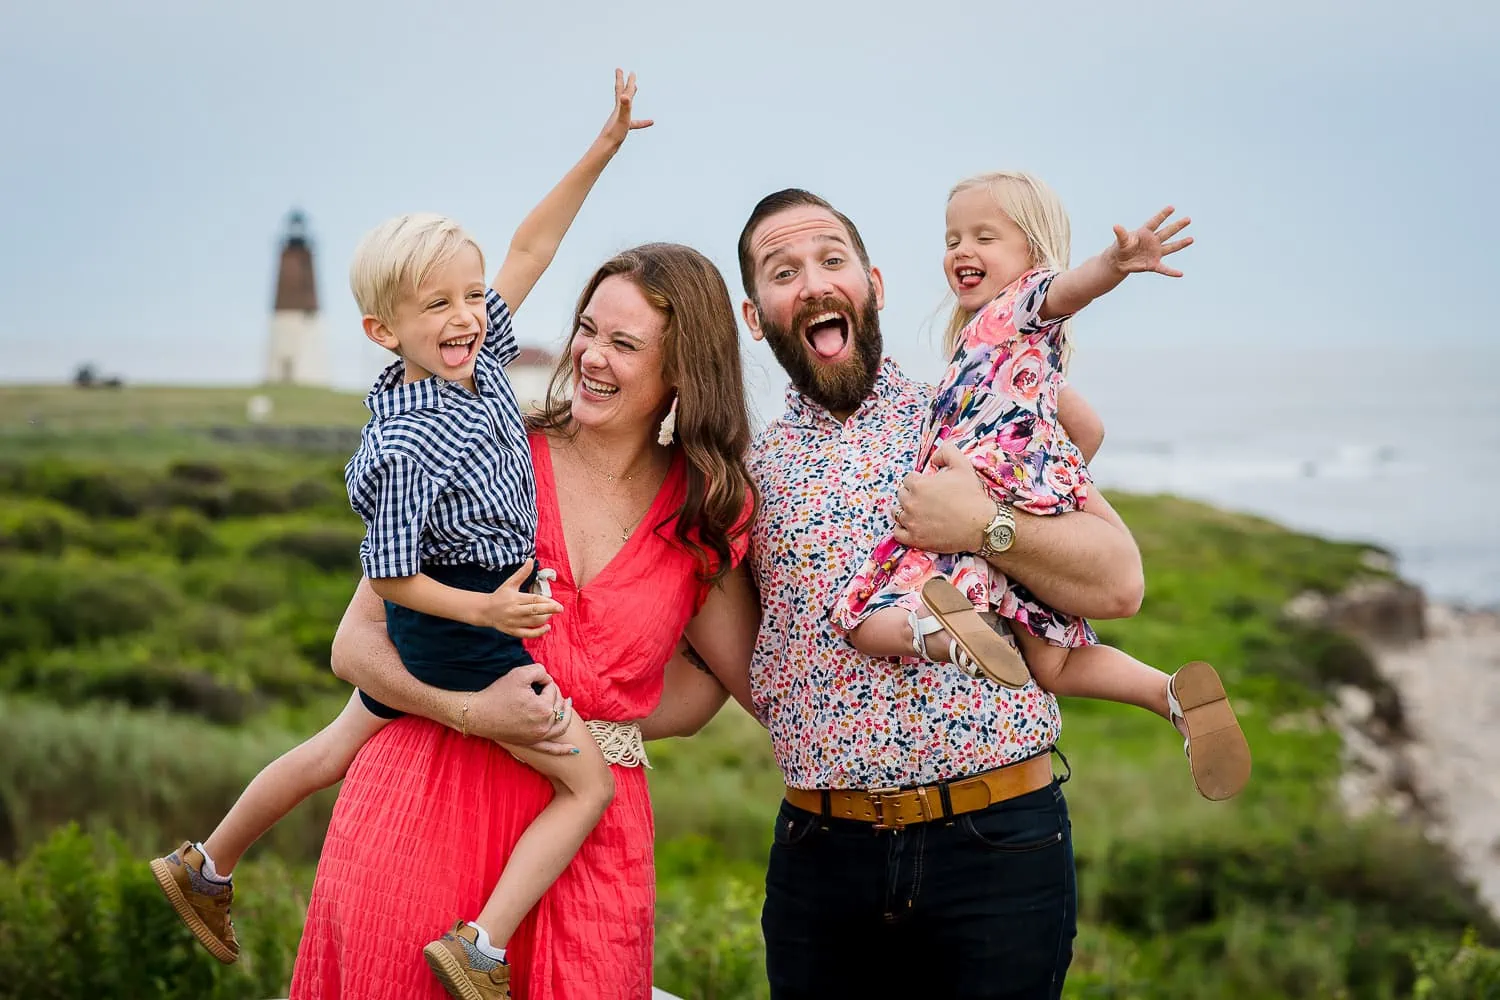 A man and woman hold two children as they laugh and stick tongues out near the Pt Judith Lighthouse